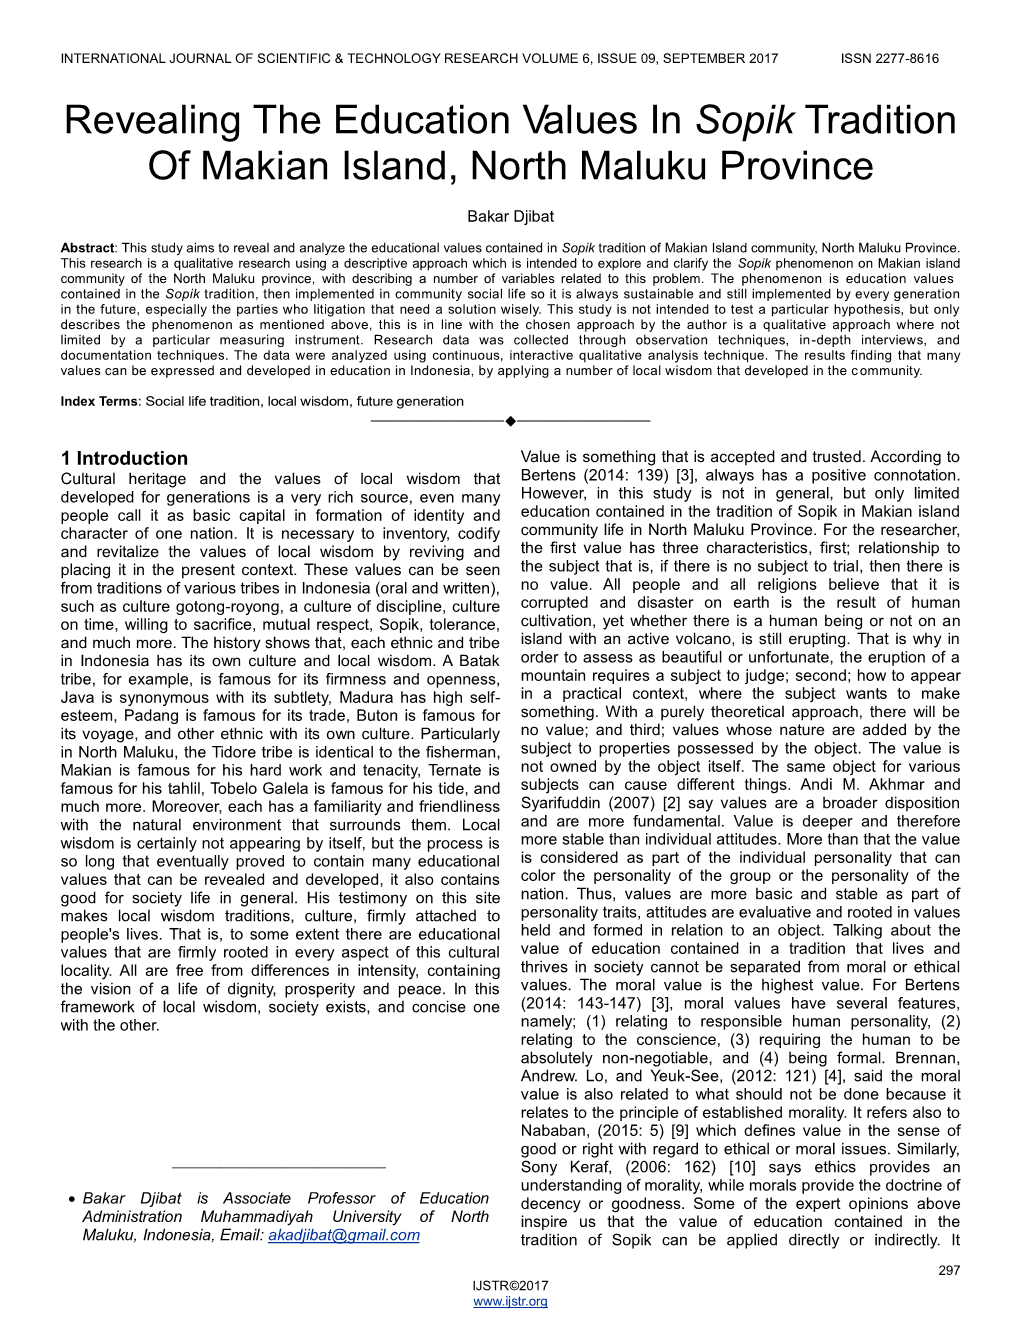 Revealing the Education Values in Sopik Tradition of Makian Island, North Maluku Province